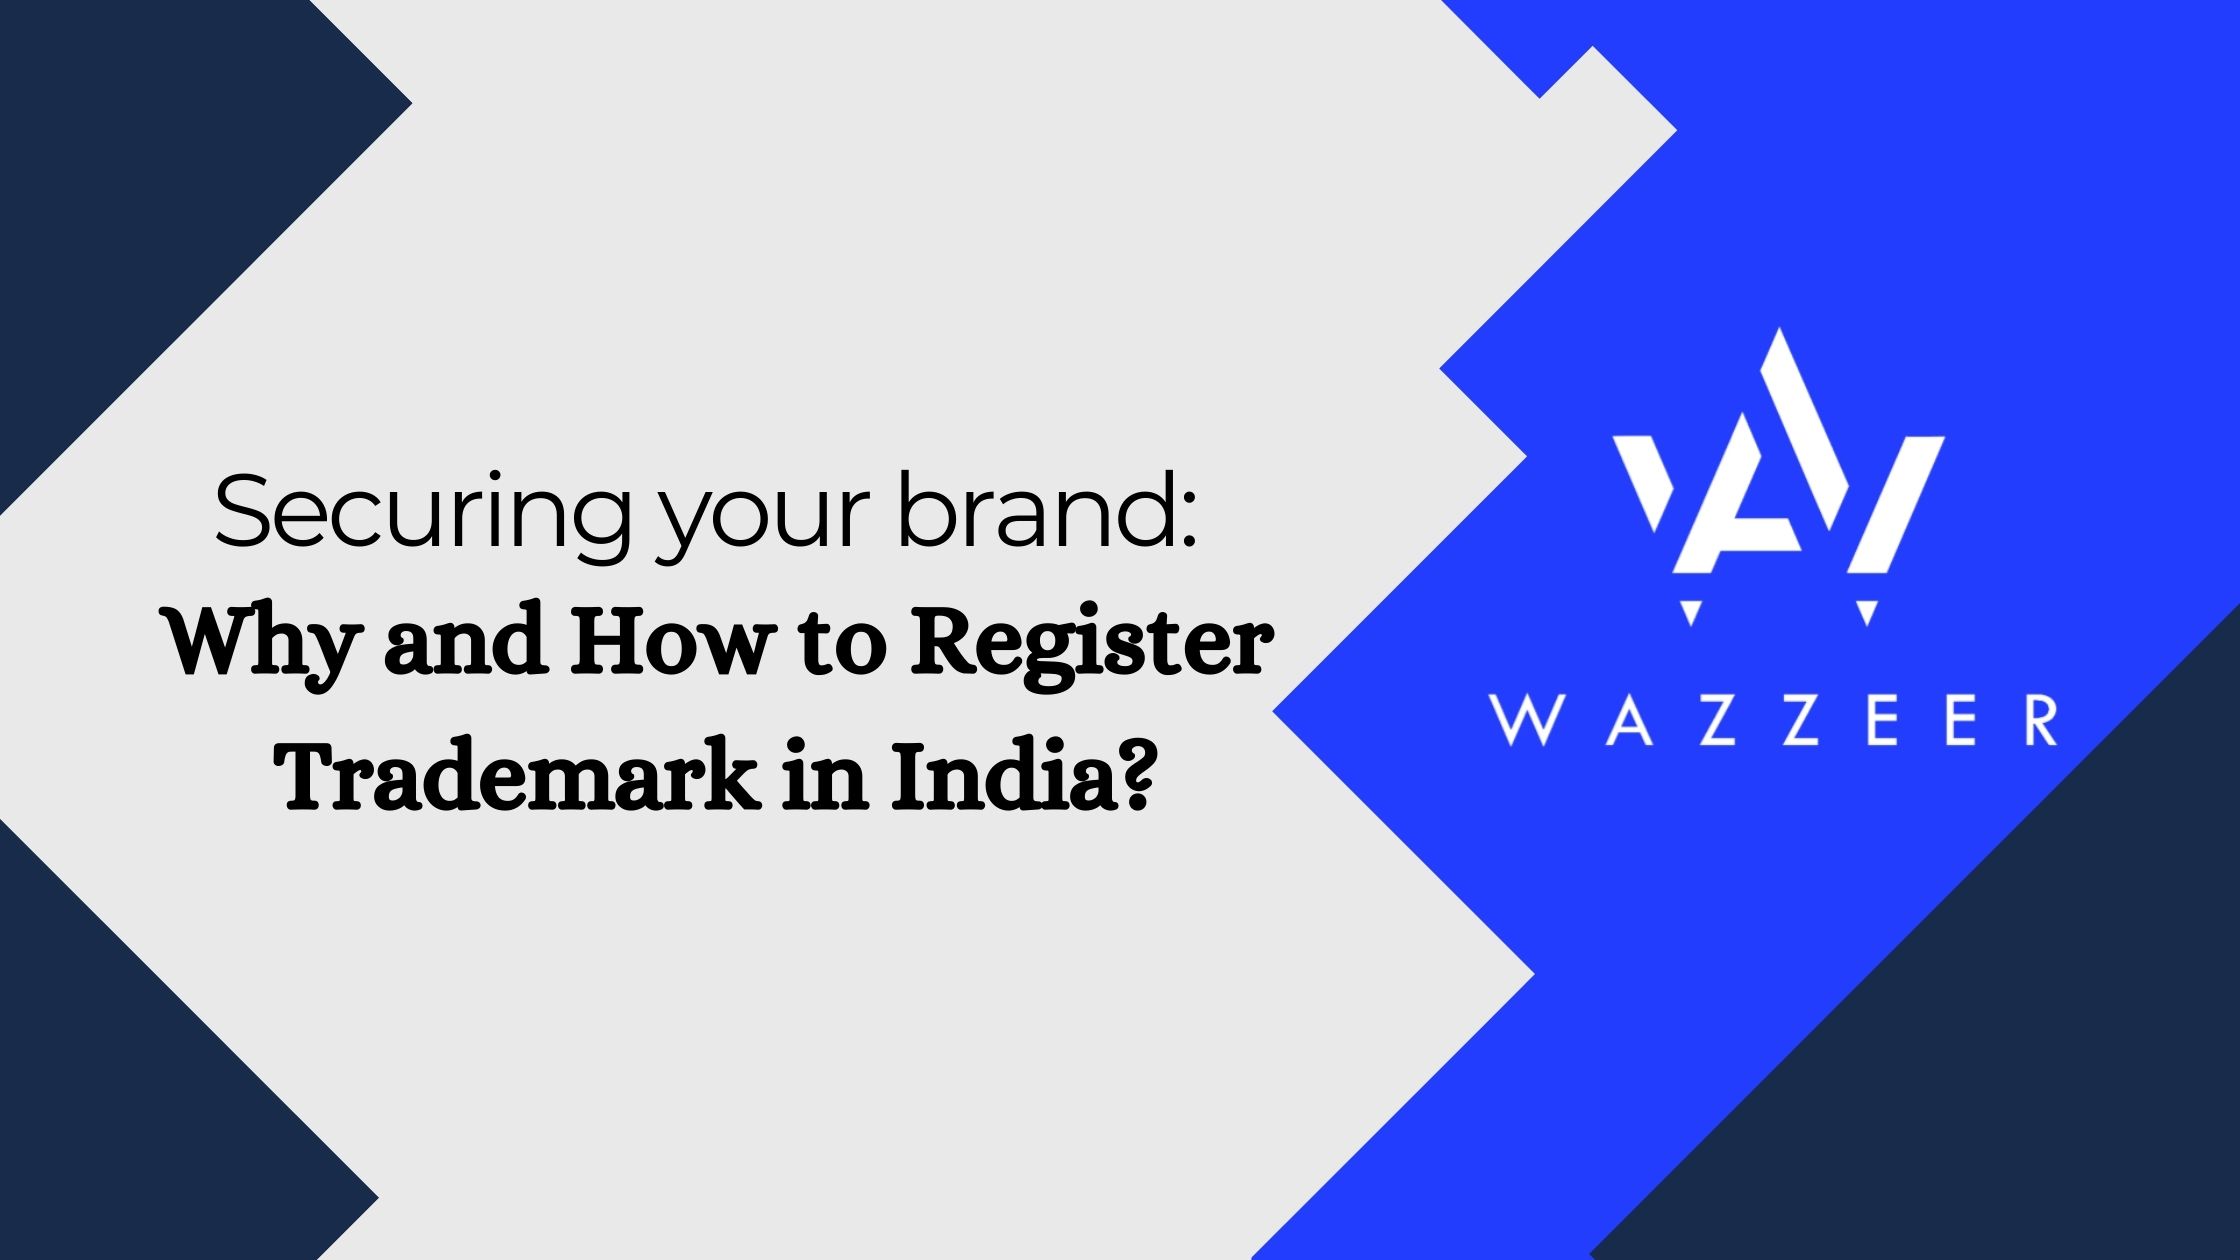 Securing your brand: Why and How to Register Trademark in India?